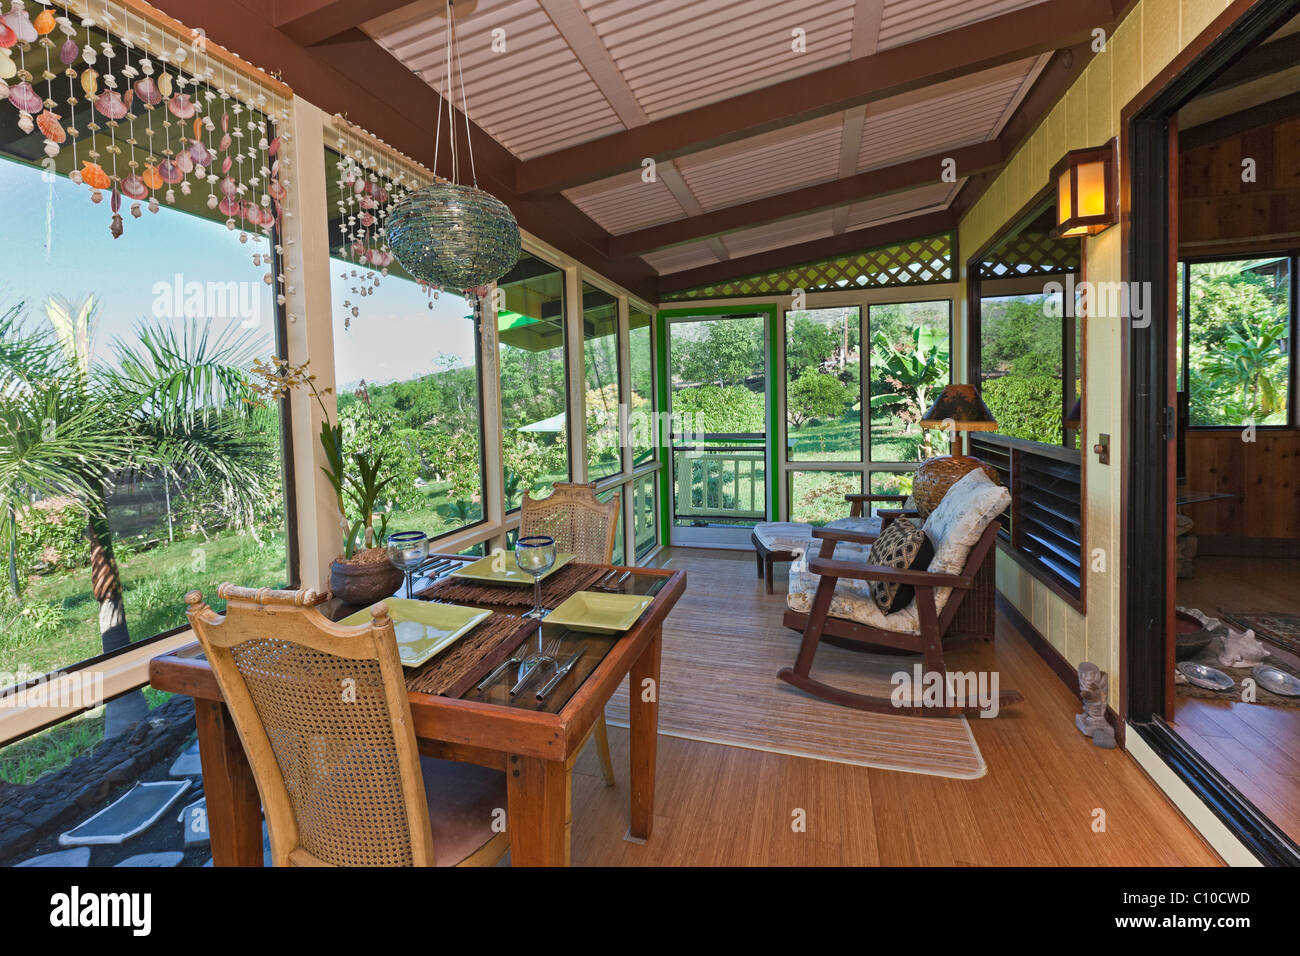 Porch (lanai) of Bed&Breakfast in Hawaii. Stock Photo